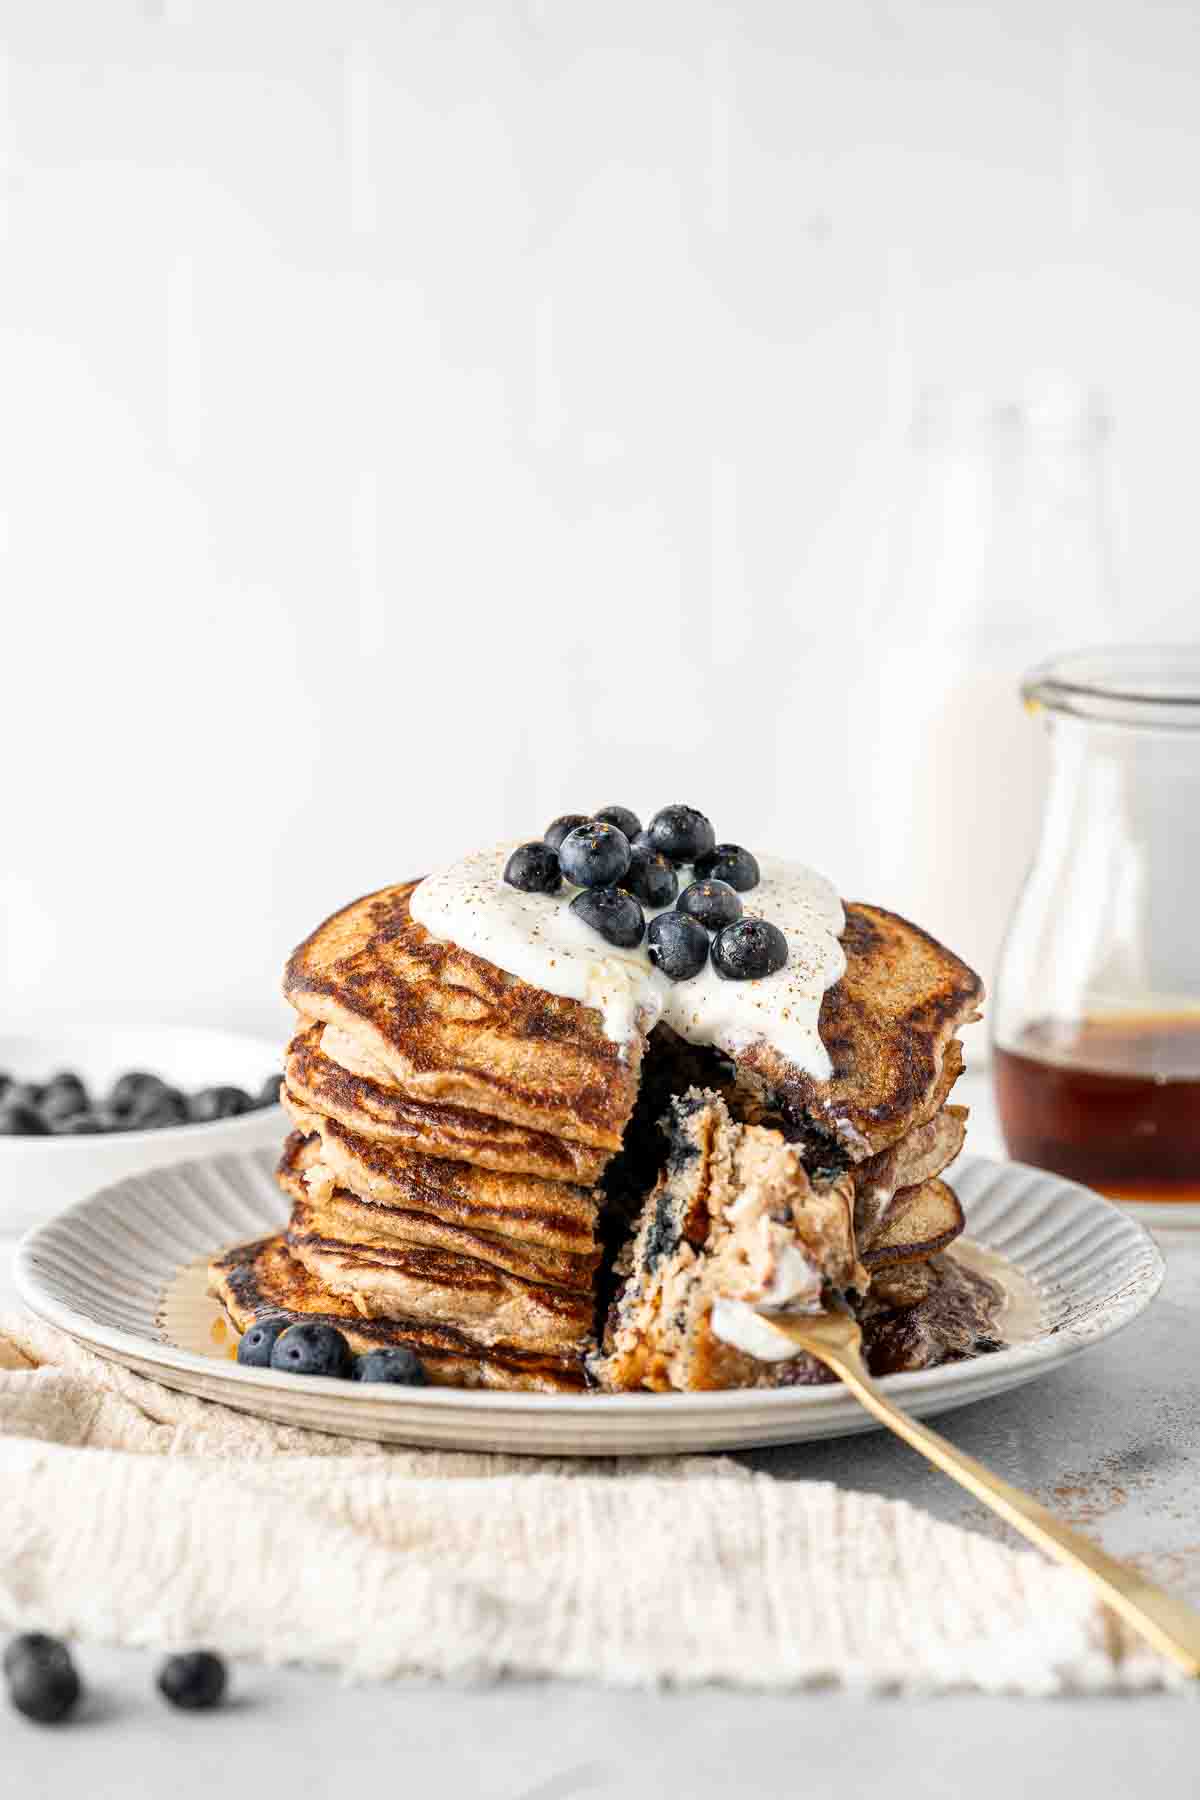 Stack of dairy free blueberry pancakes with a bite taken.